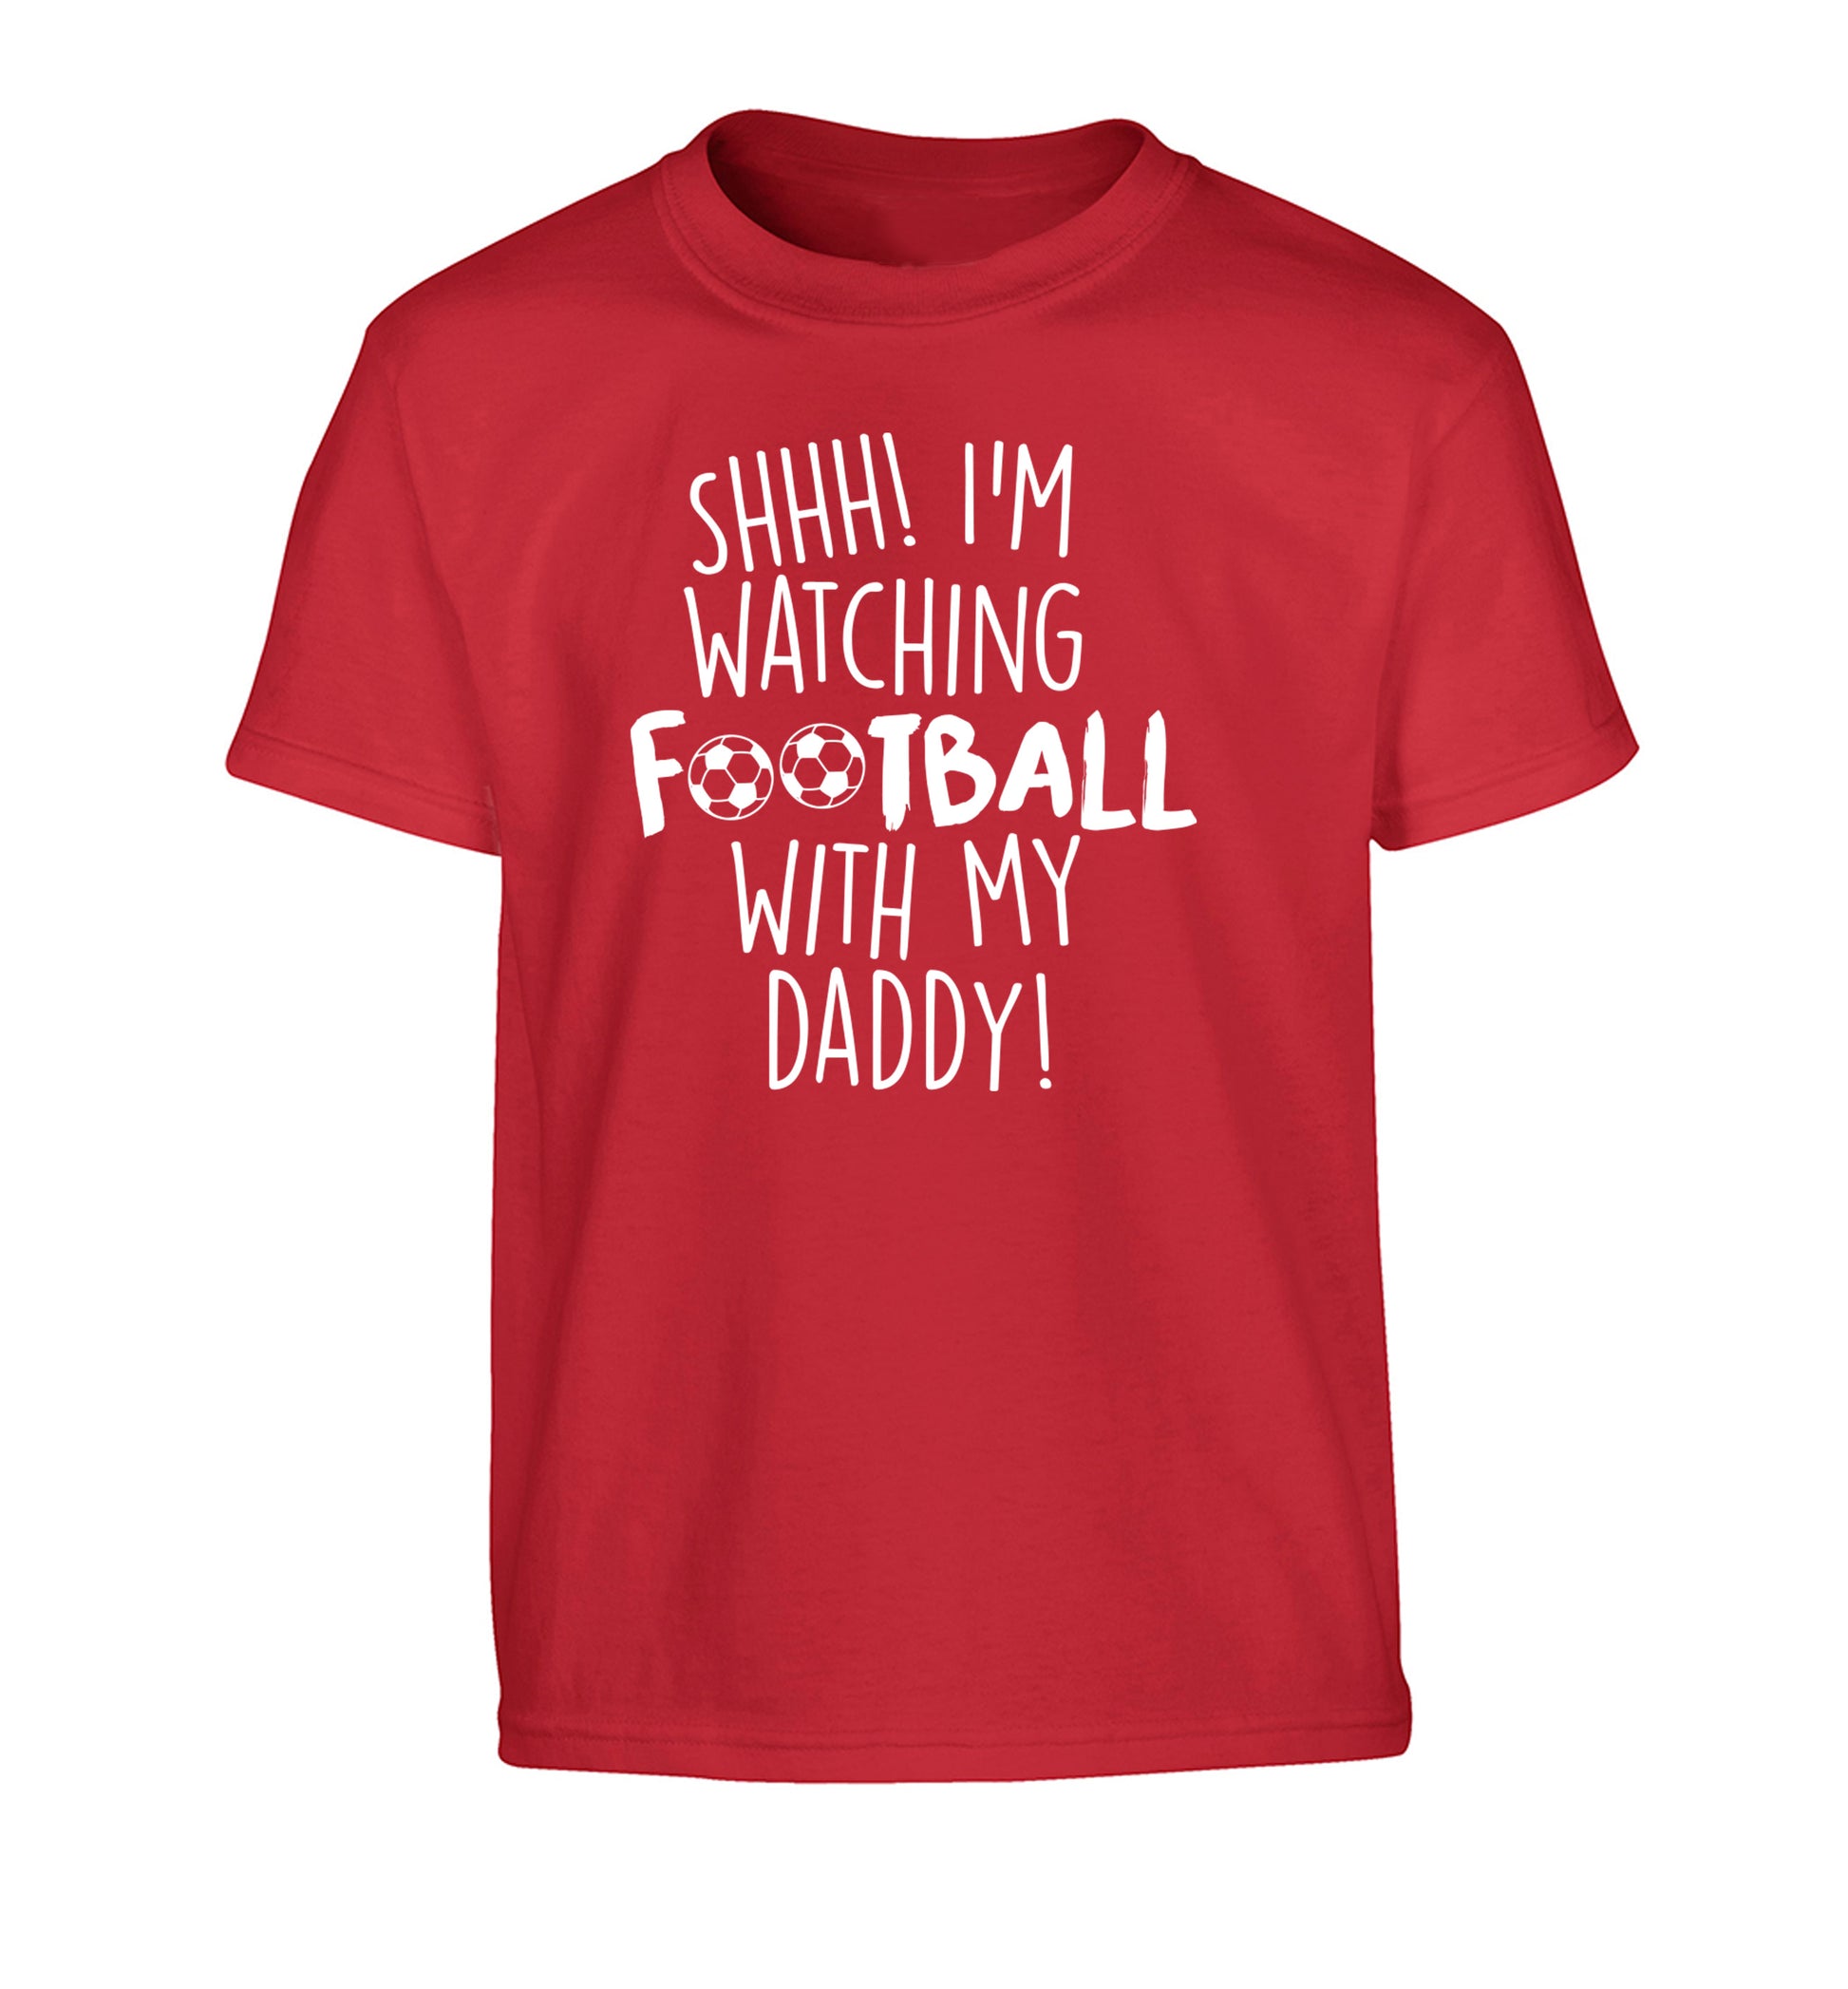 Shhh I'm watching football with my daddy Children's red Tshirt 12-14 Years